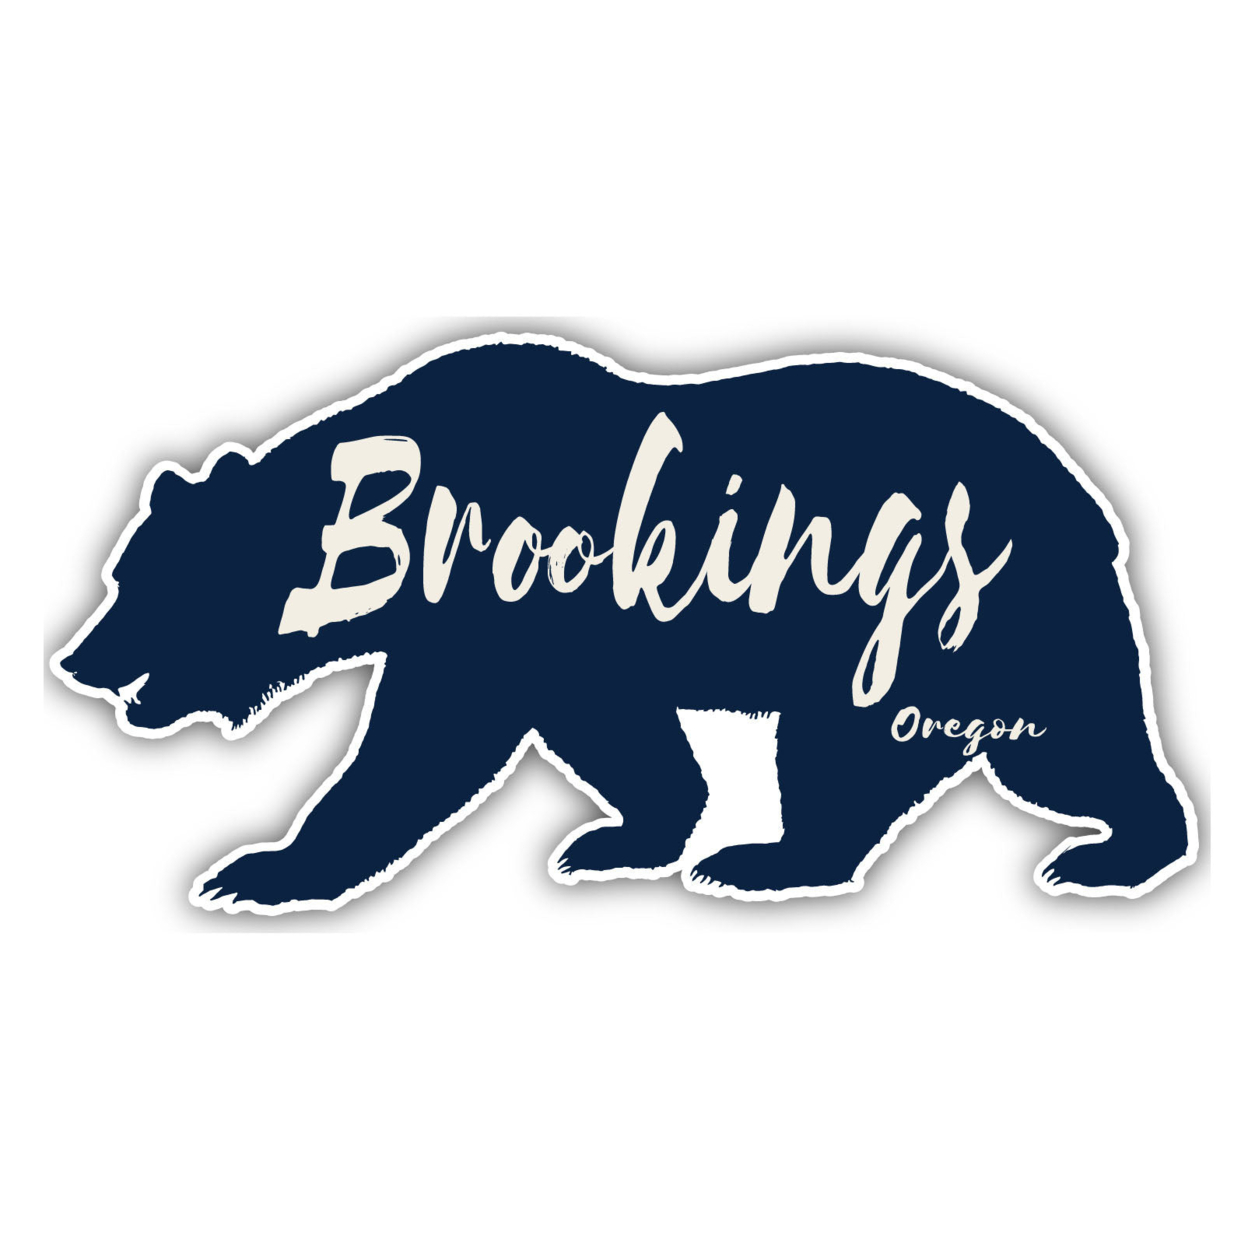 Brookings Oregon Souvenir Decorative Stickers (Choose Theme And Size) - 4-Pack, 4-Inch, Tent